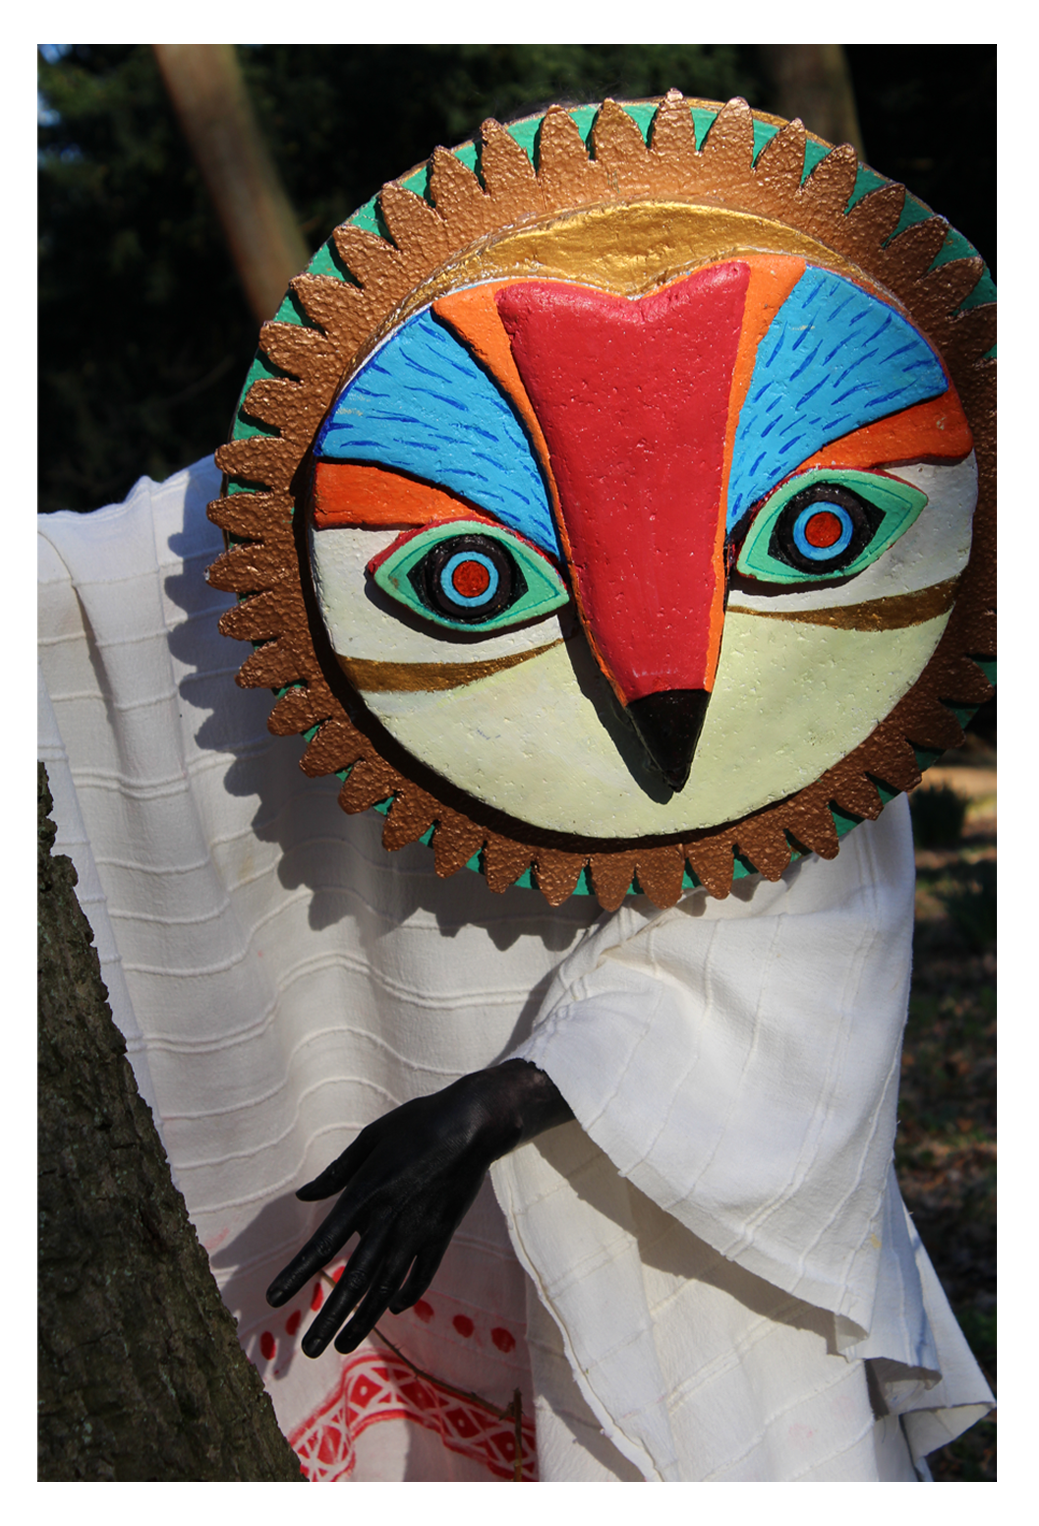 An owl mask made from recycled materials (cardboard and packaging polystyrene) painted with acrylic, and a poncho made from recycled cloth.